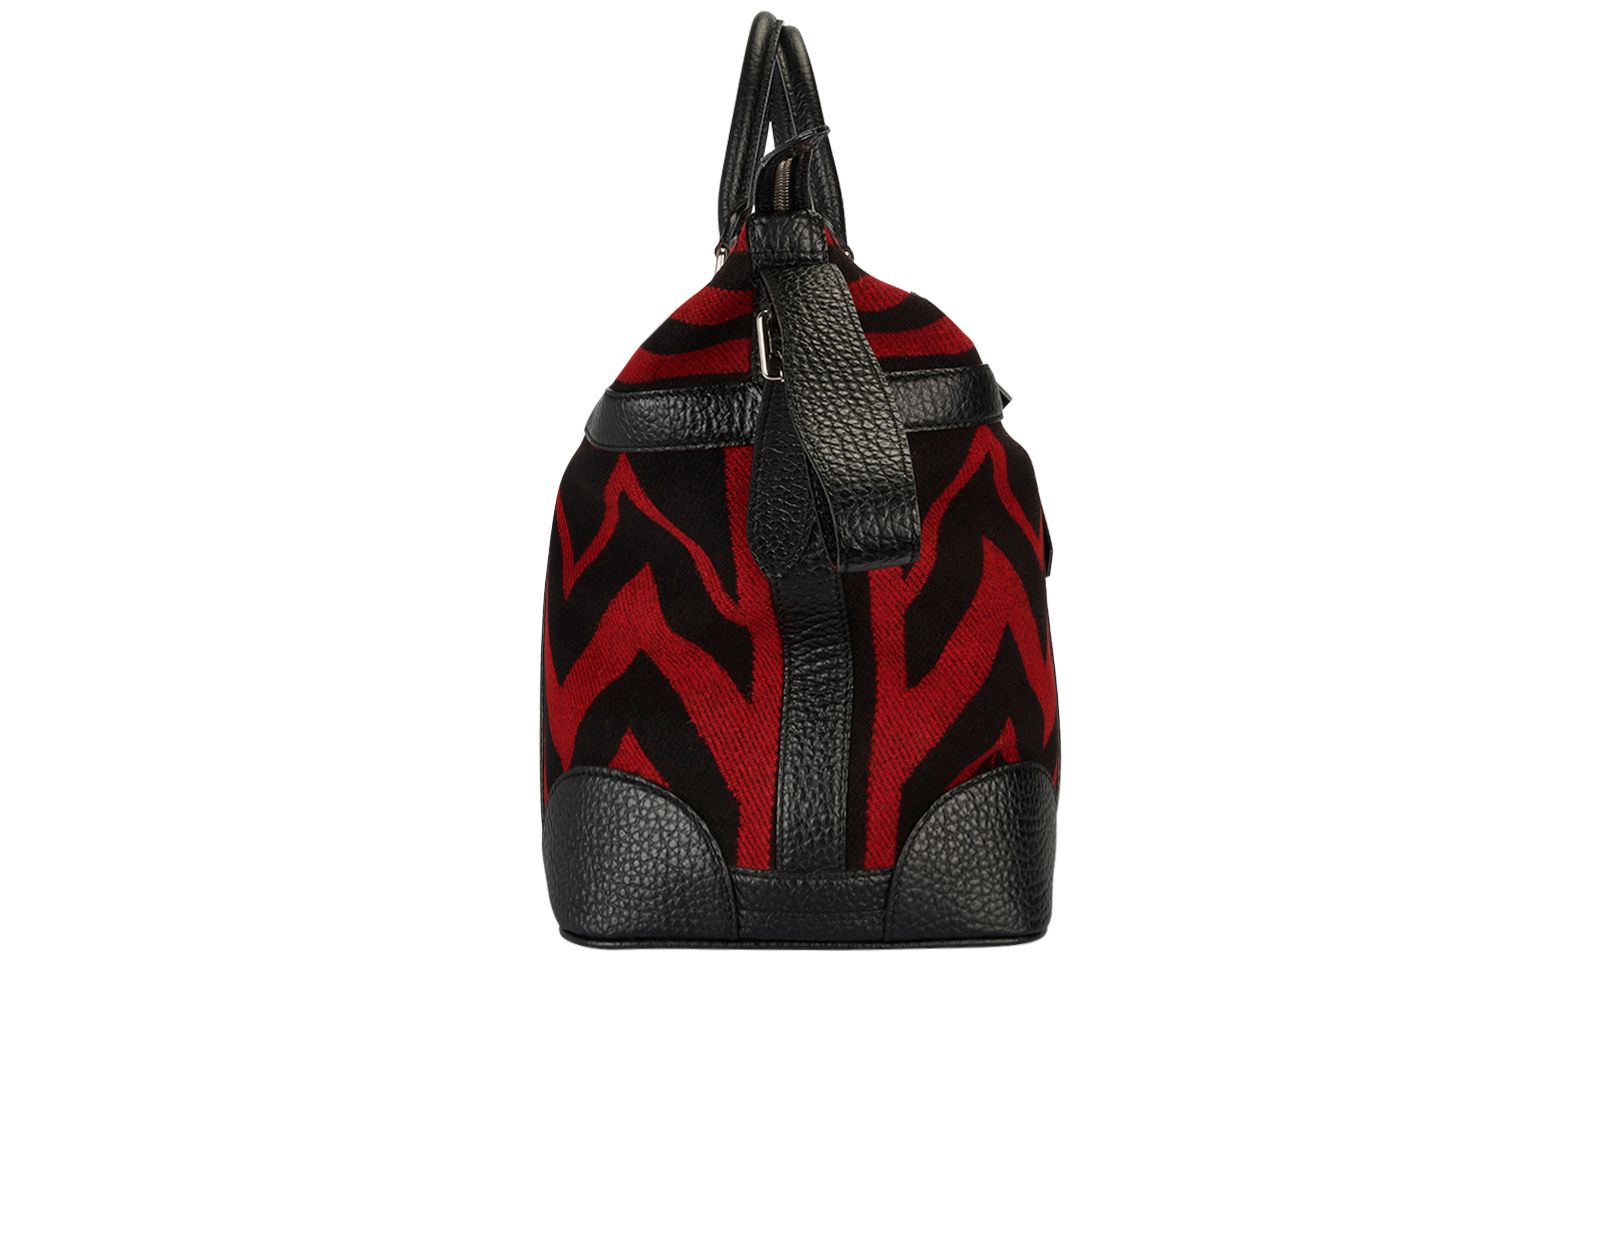 Louis Vuitton Limited Edition Vali Blanket Black & Red Bag 2006